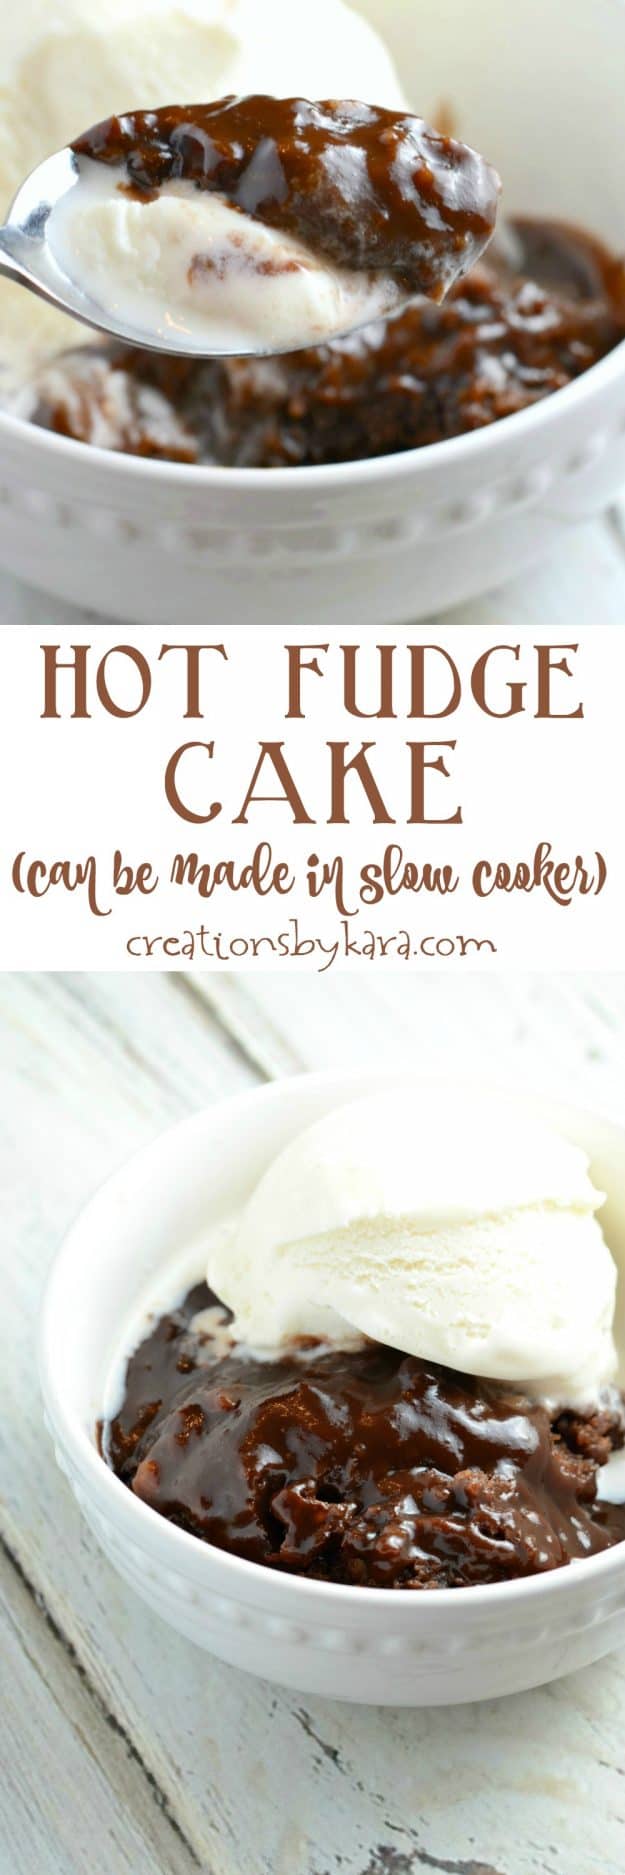 slow cooker hot fudge cake tall pinterest collage